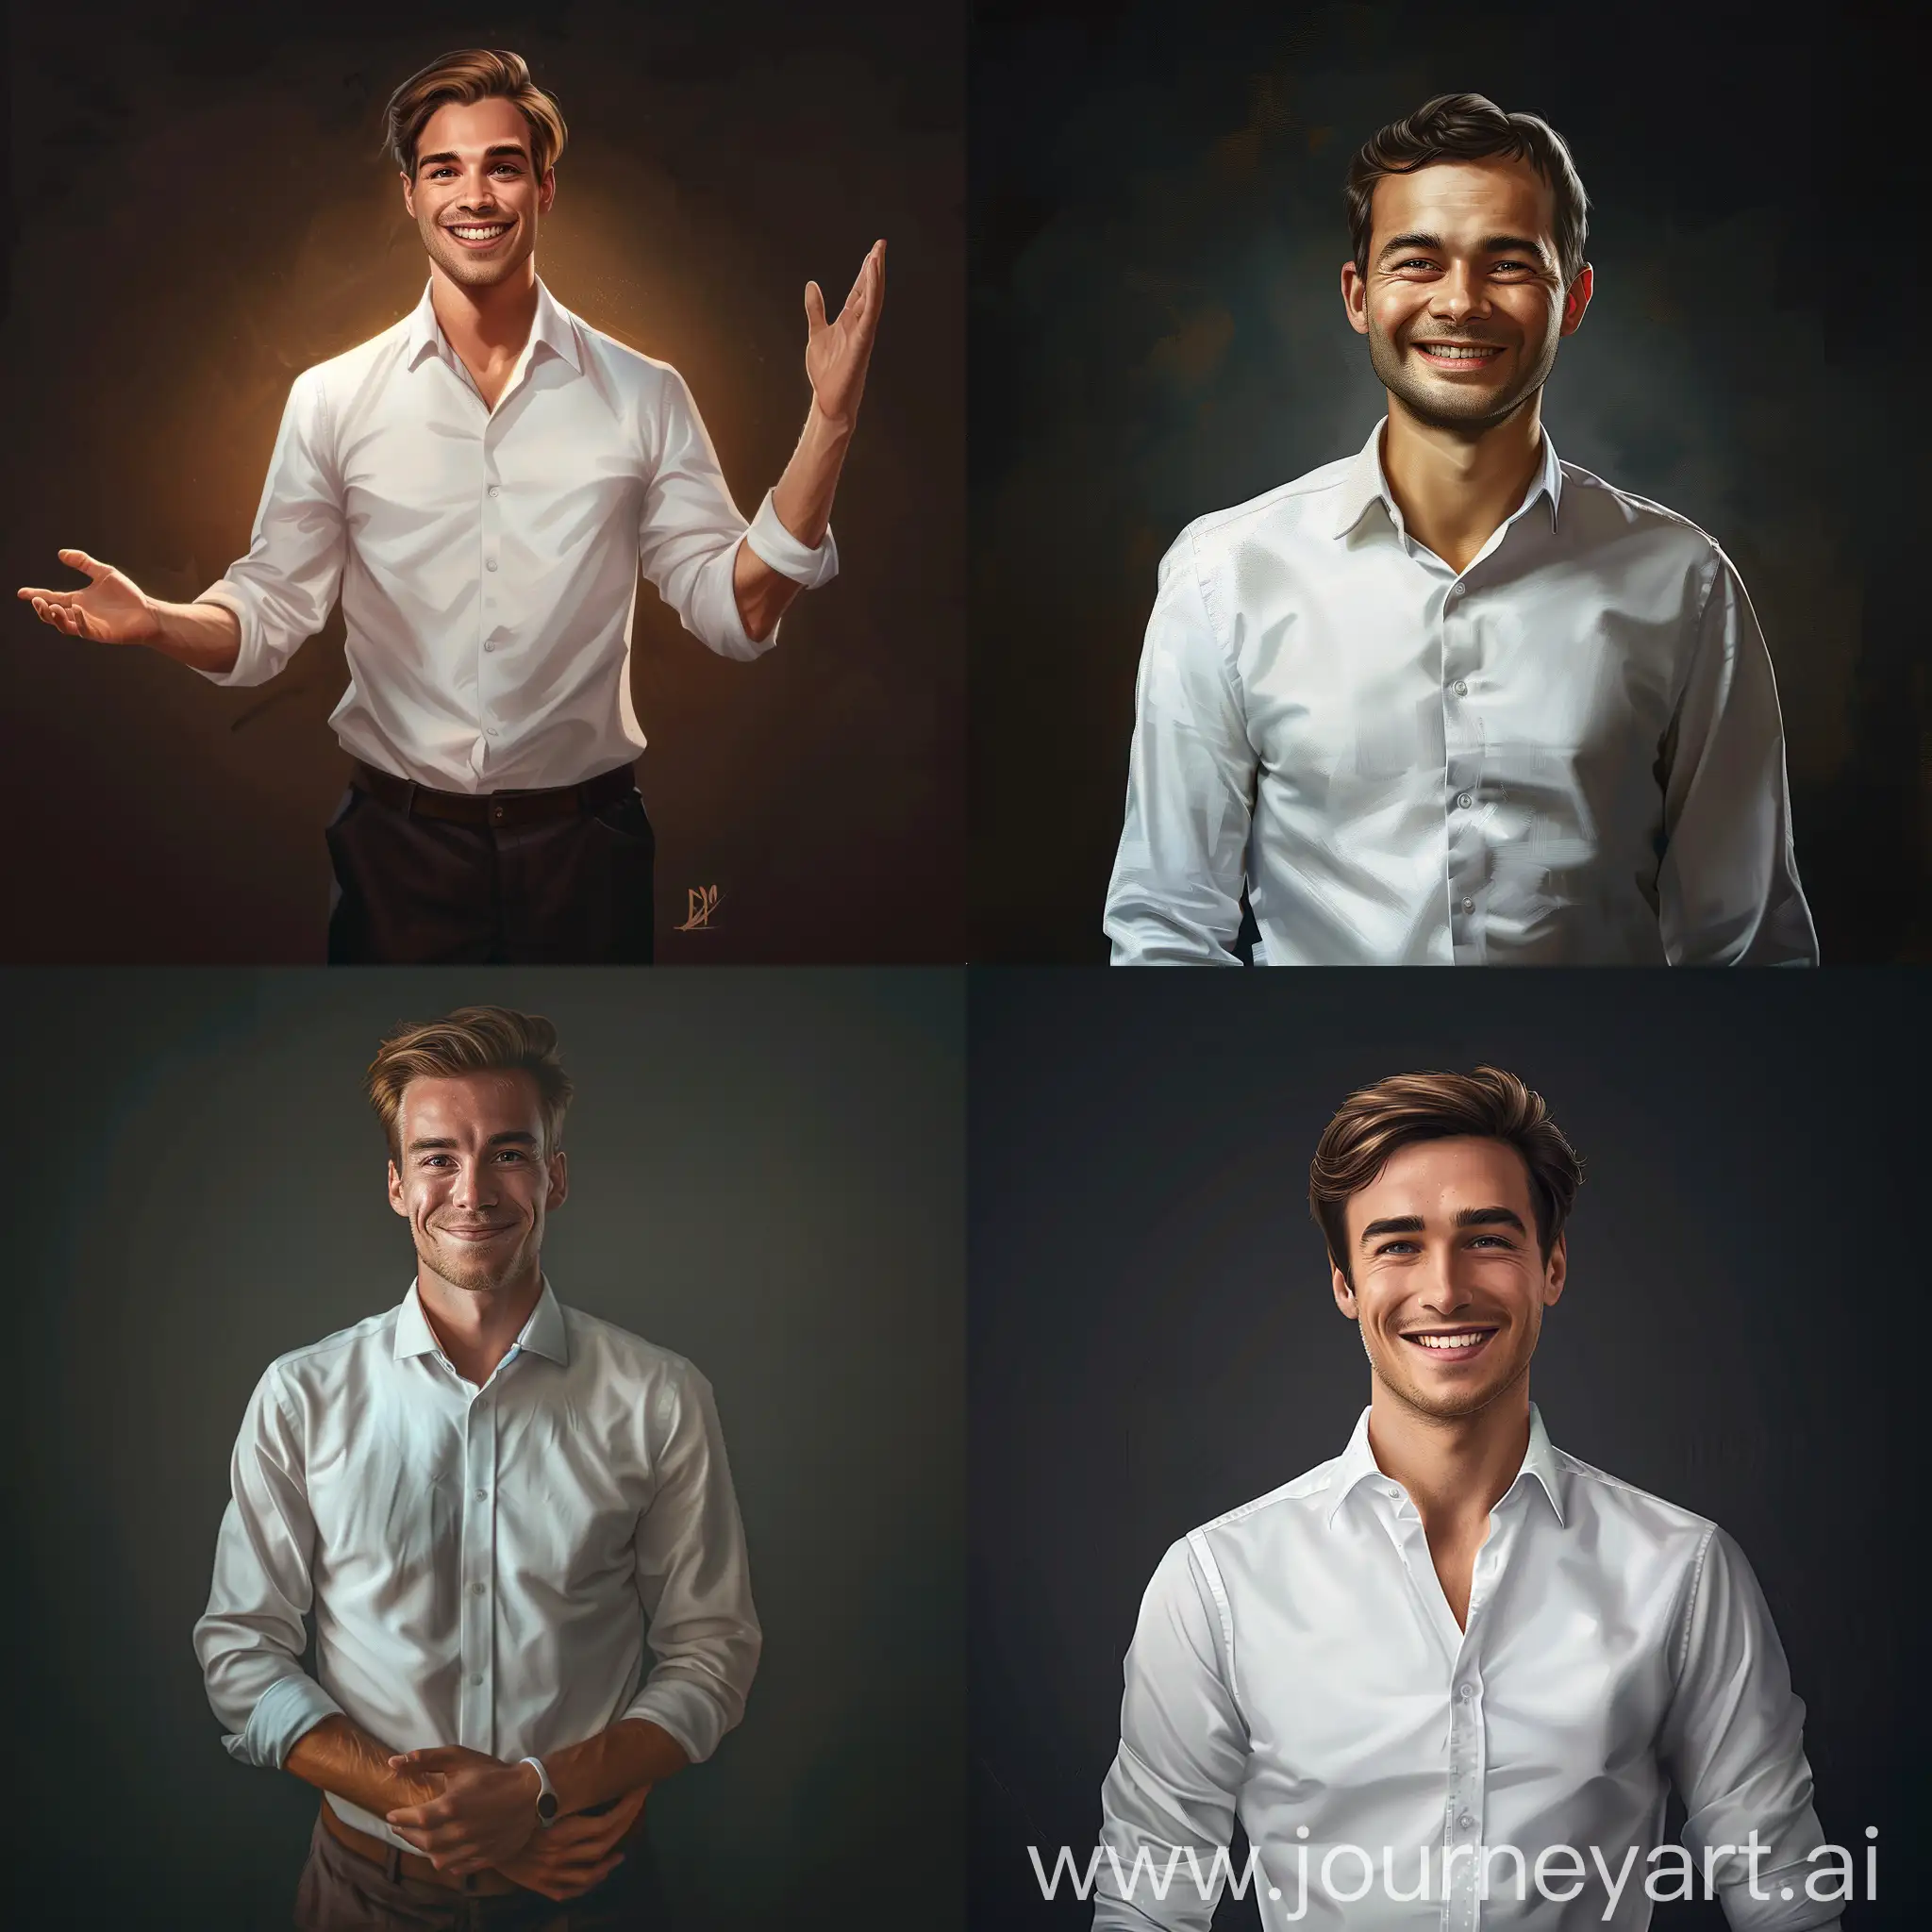 Smiling-Manager-in-White-Shirt-Inviting-Young-People-Photorealistic-Portrait-on-Dark-Background